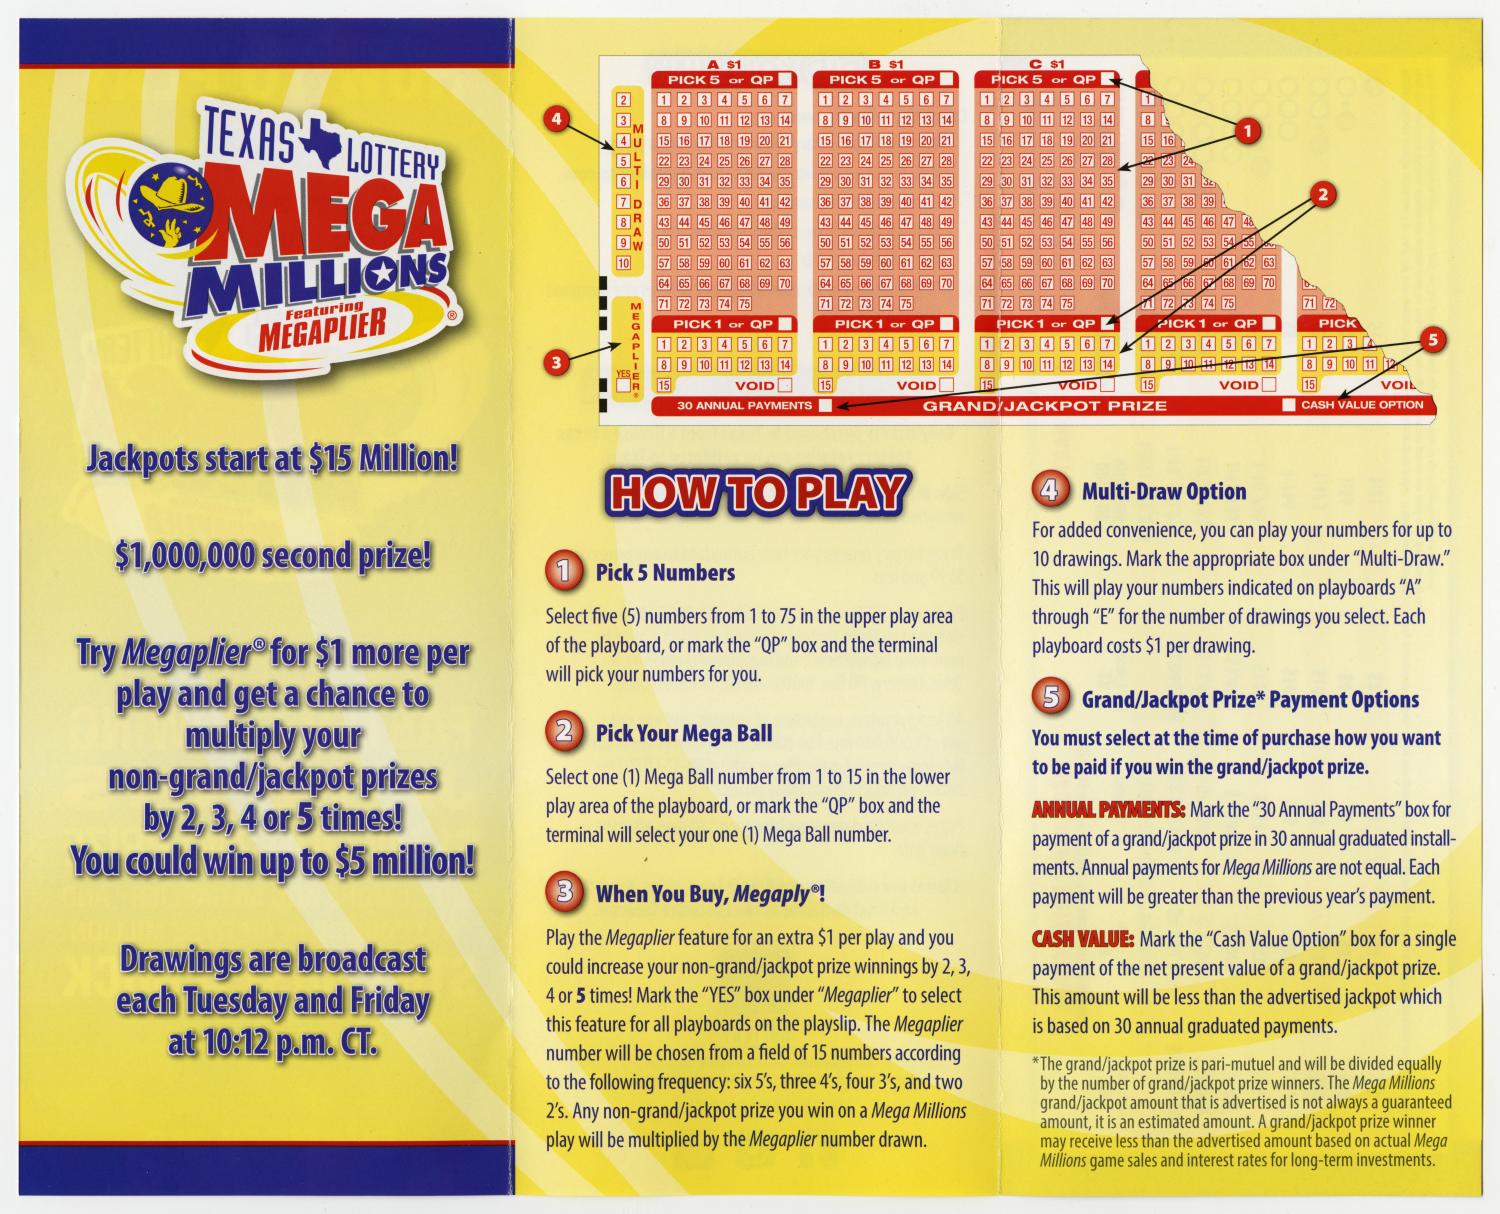 How to Play Texas Mega Millions featuring Megaplier Page 2 of 3